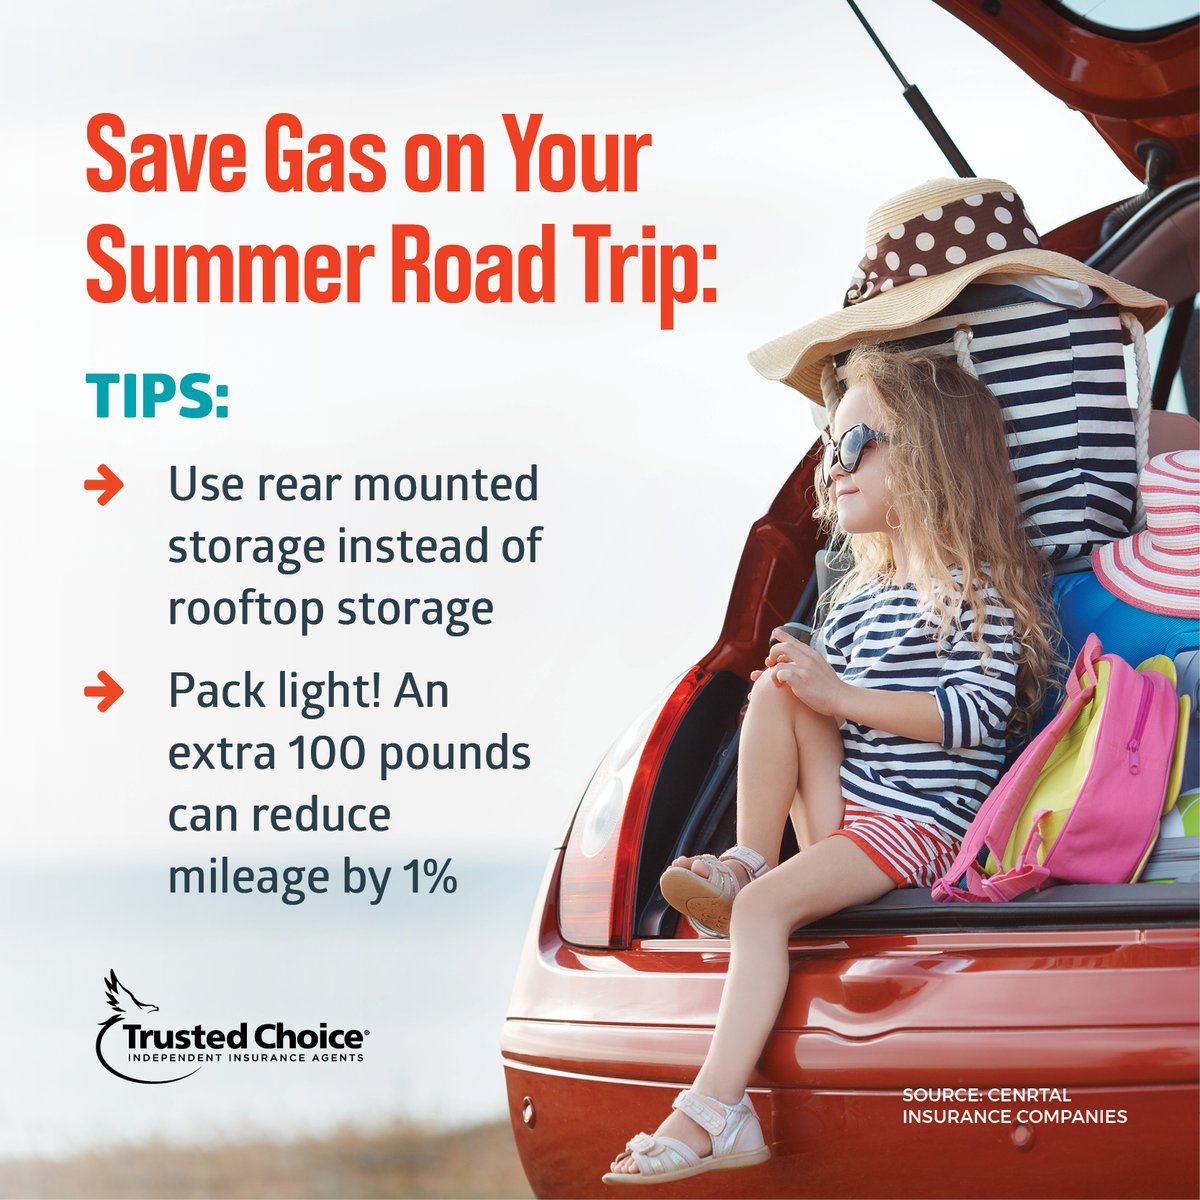 Headed out on a road trip this summer? Here are a few tips to save gas:

#roadtrips #roadtrip #travel  #adventure #autoinsurance #carinsurance #insurance #insuranceagent #insuranceagency #insurancepolicy #insuranceclaim #insurancequote #washingtondc #dc #maryland